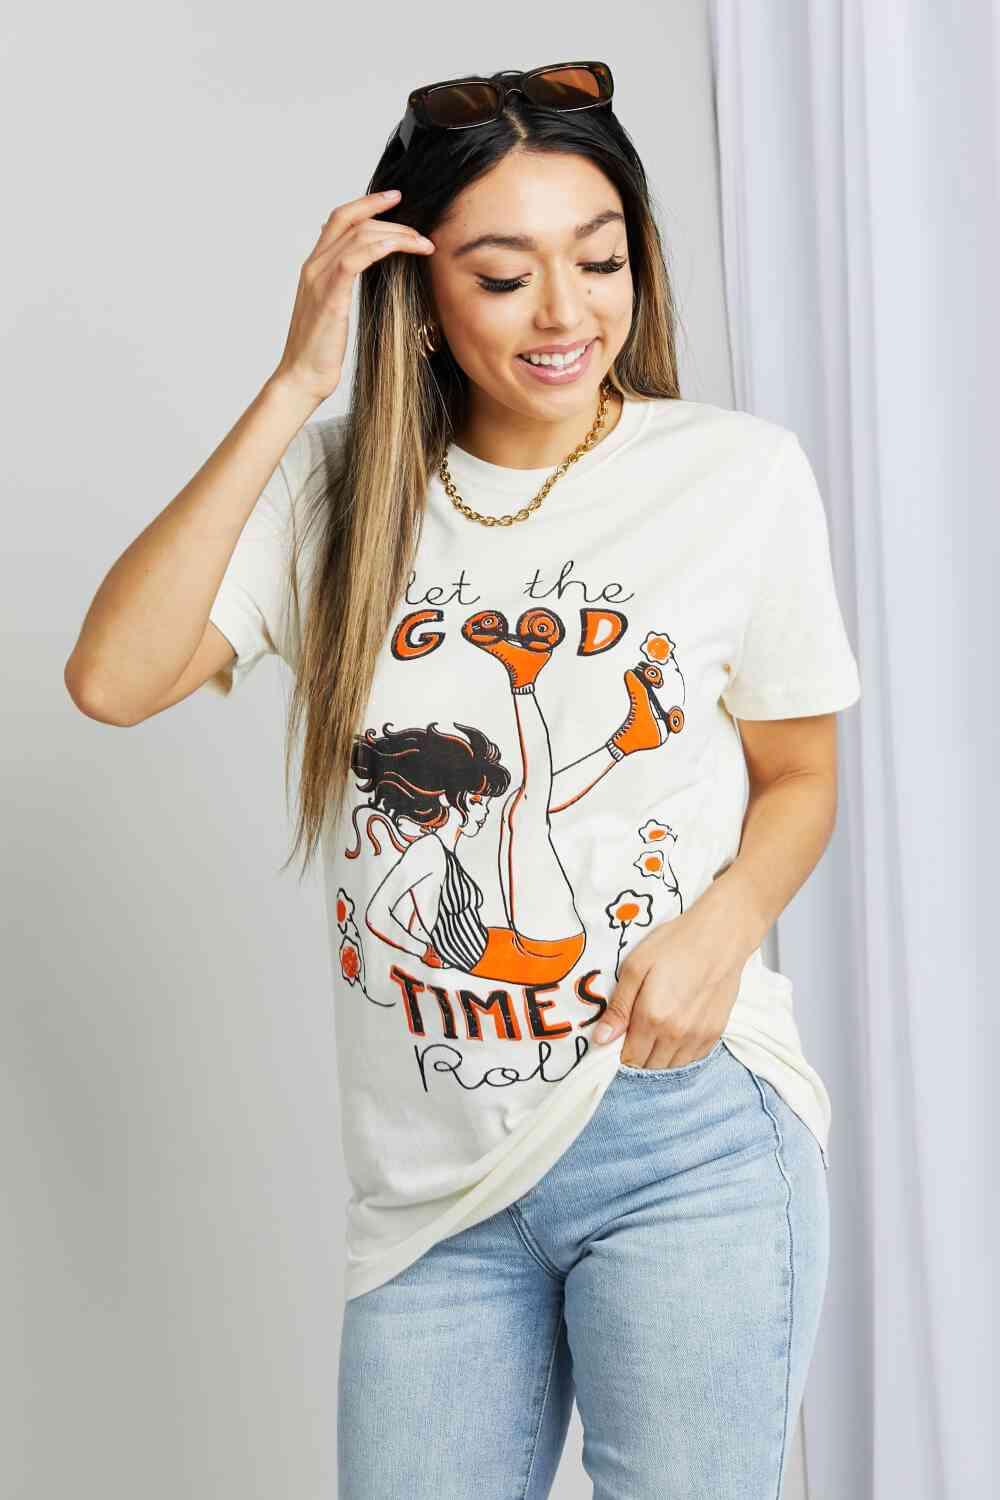 mineB Full Size LET THE GOOD TIMES ROLL Graphic Tee - Closet of Ren